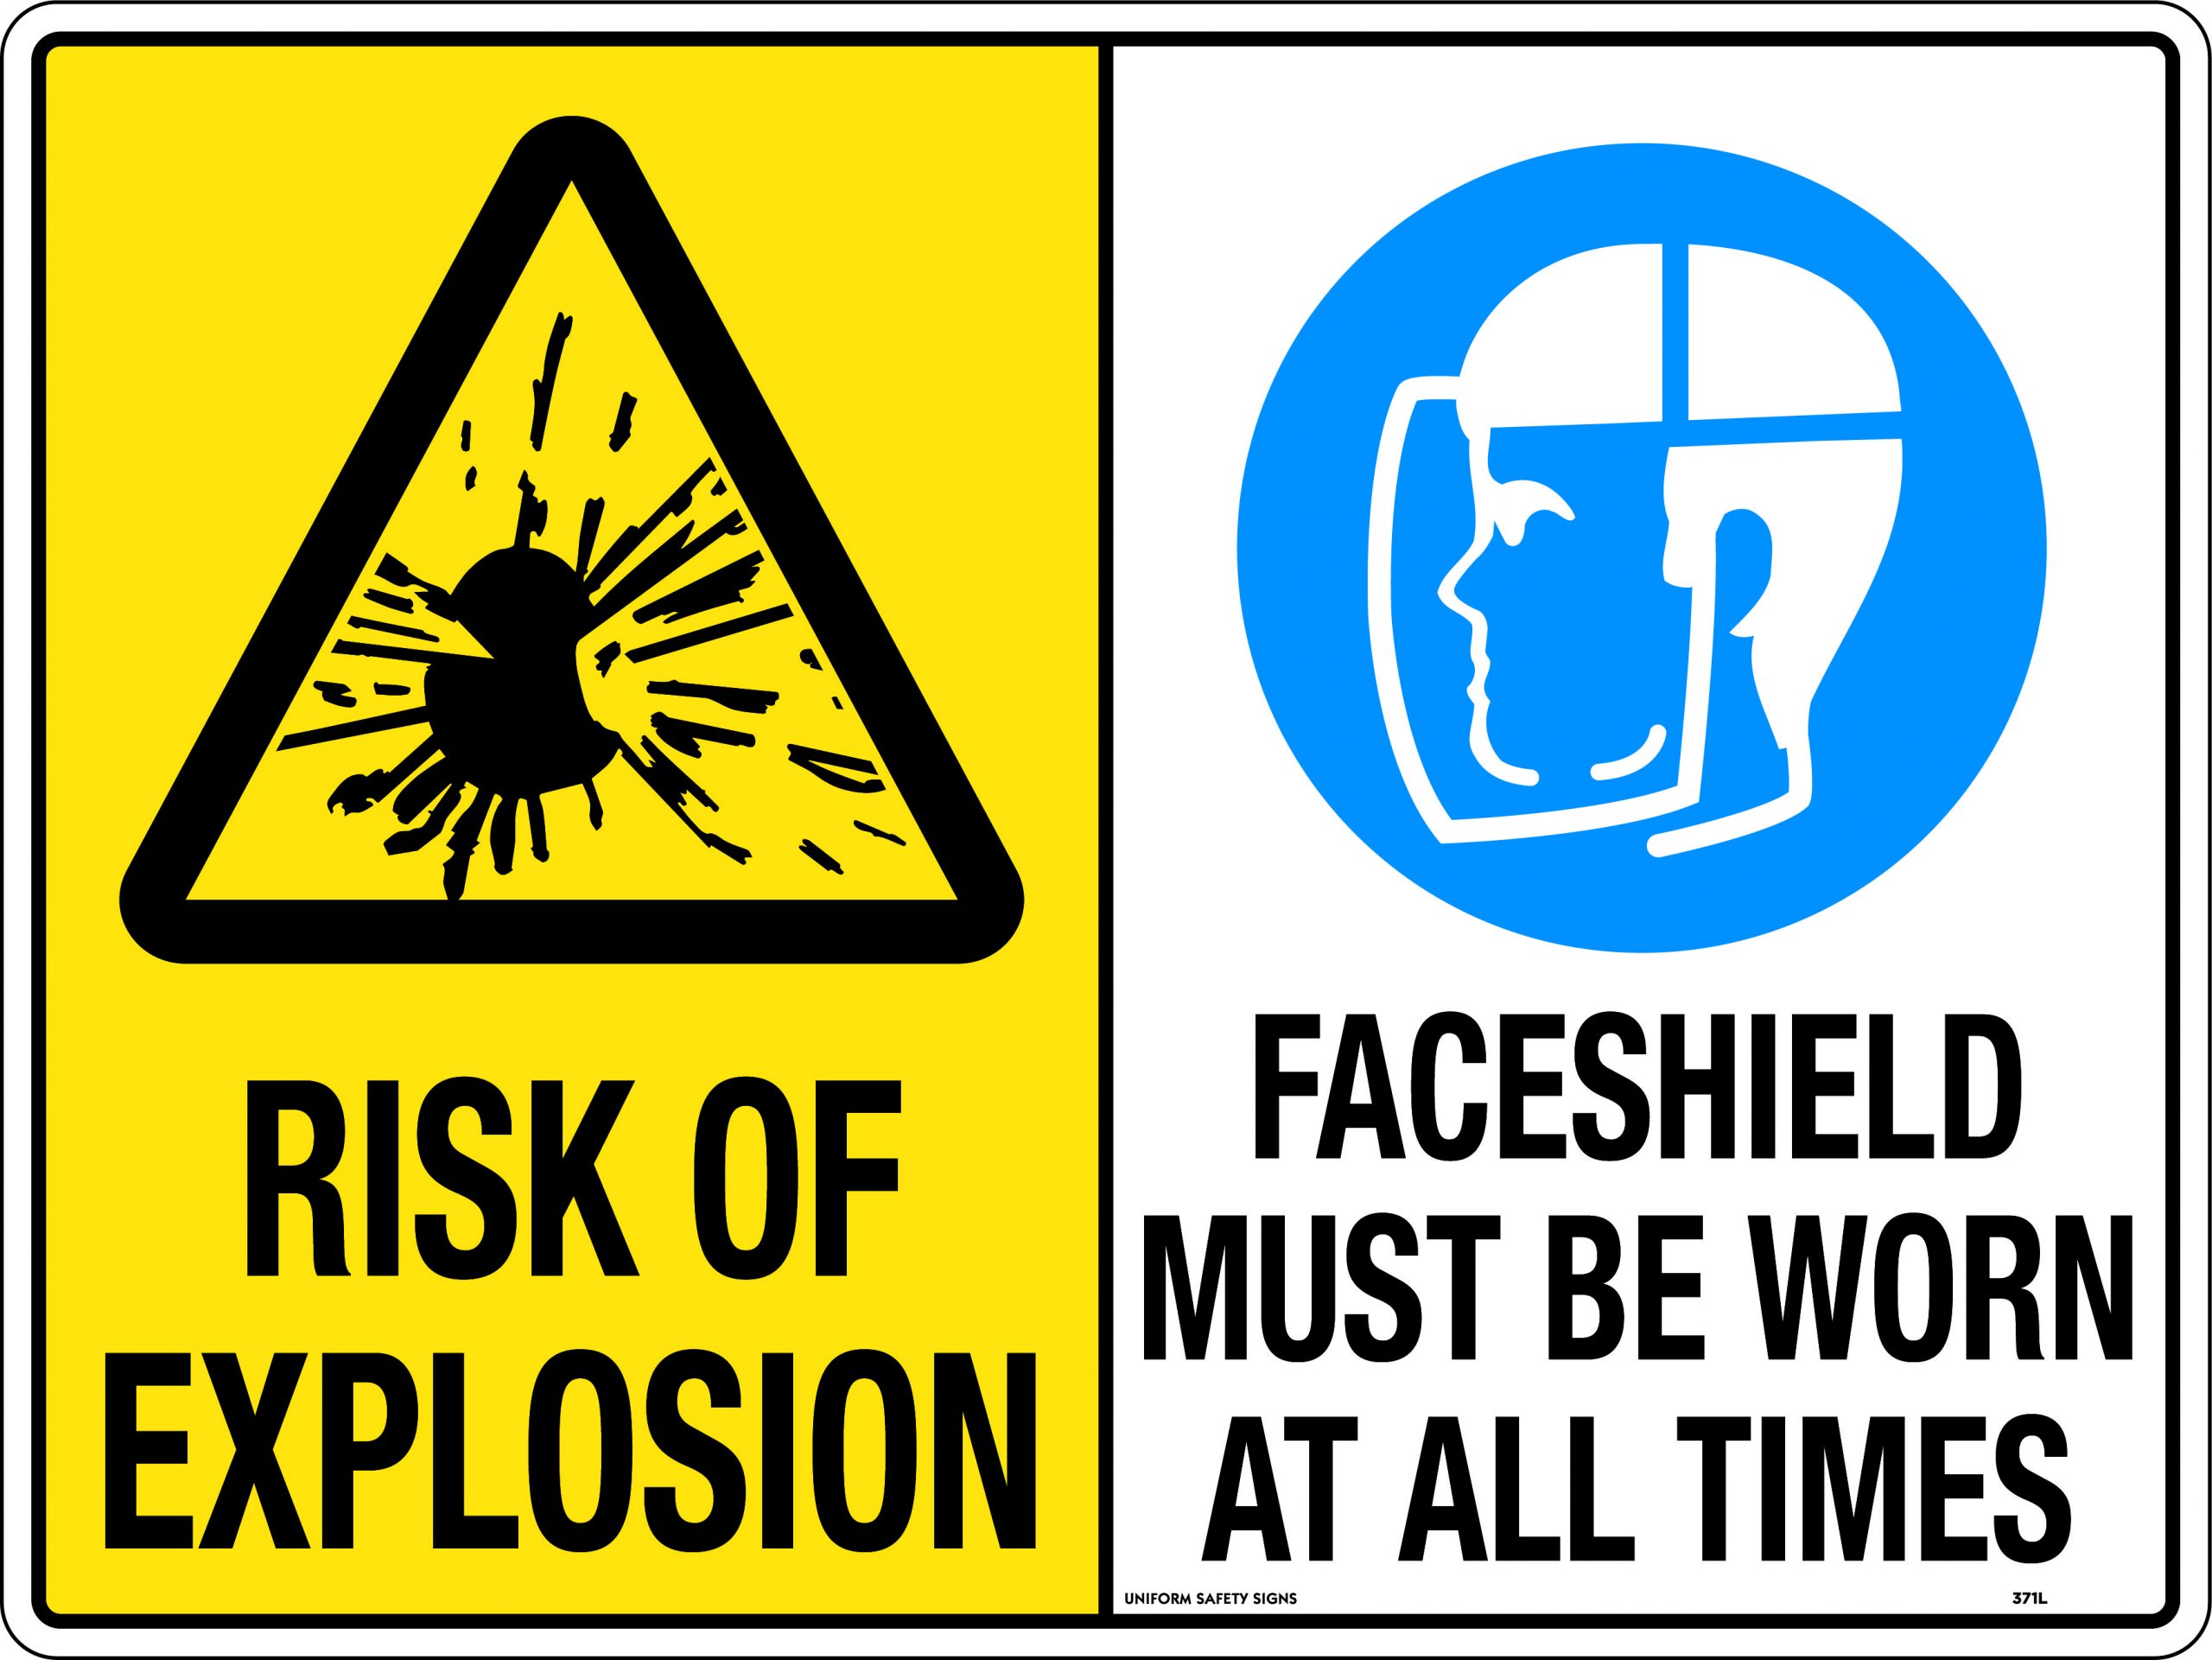 UNIFORM SAFETY 600X450MM POLY MULTI SIGN RISK OF EXPLOSION/FACE SHIELD